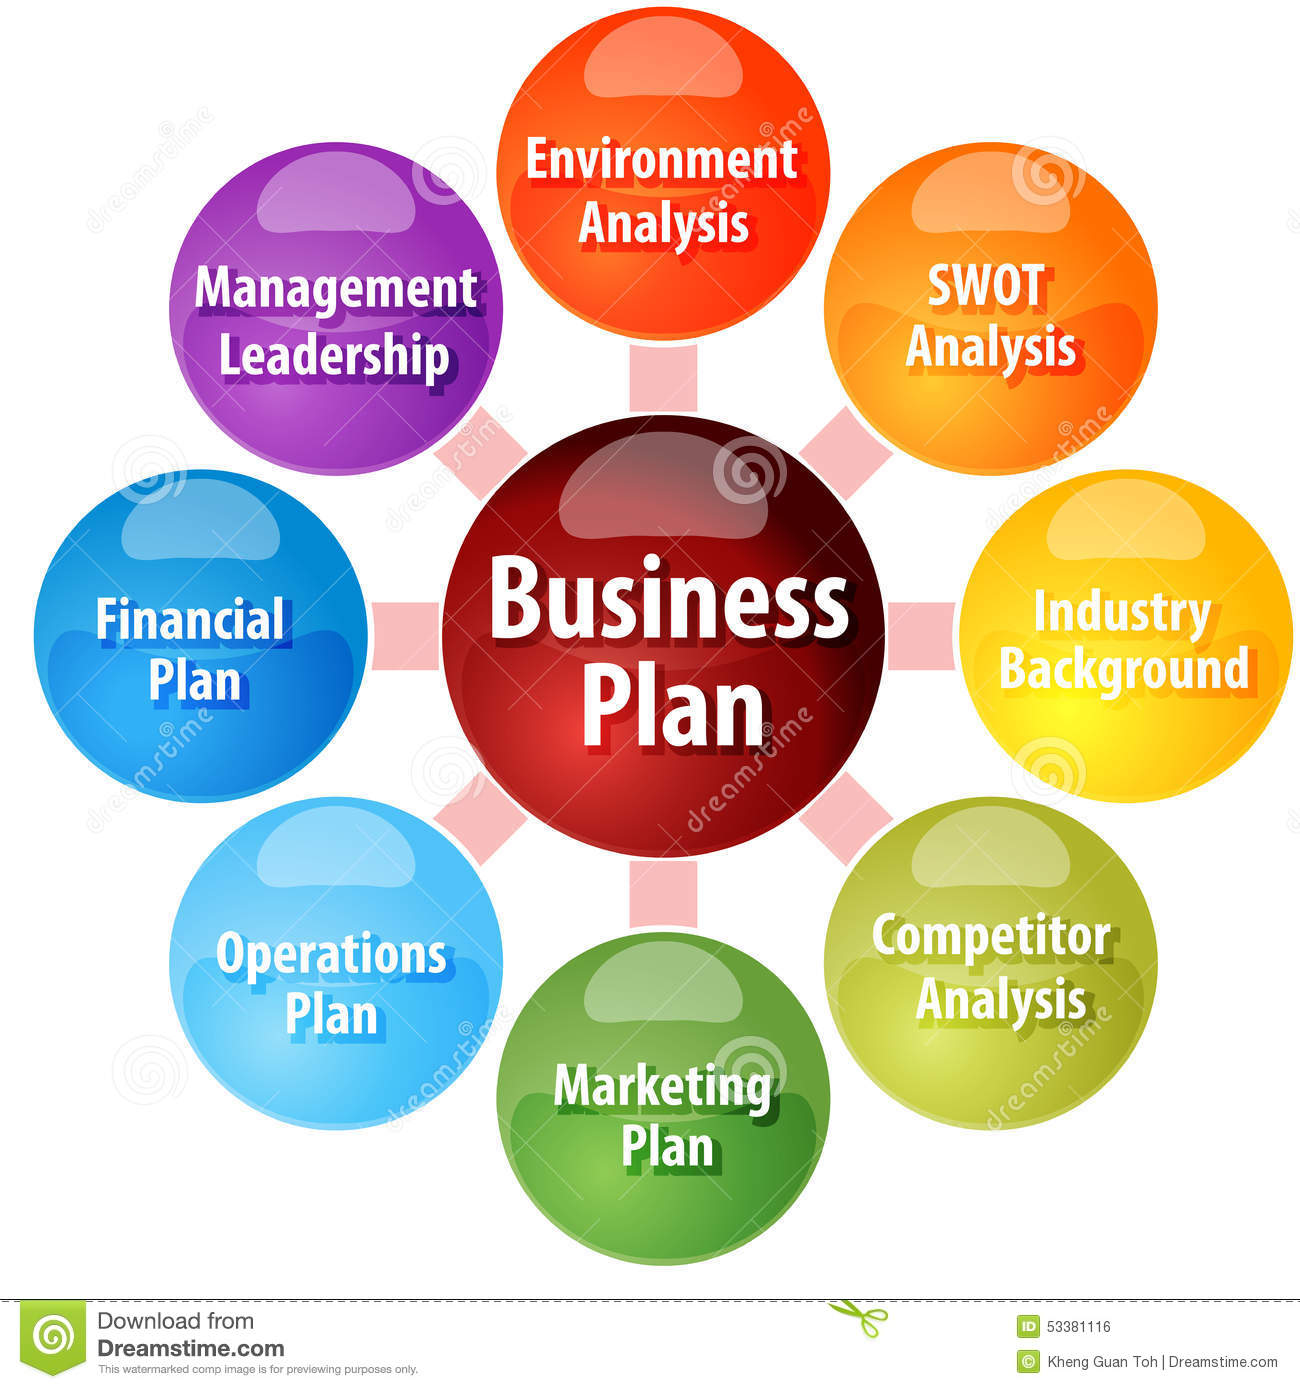 component of business plan